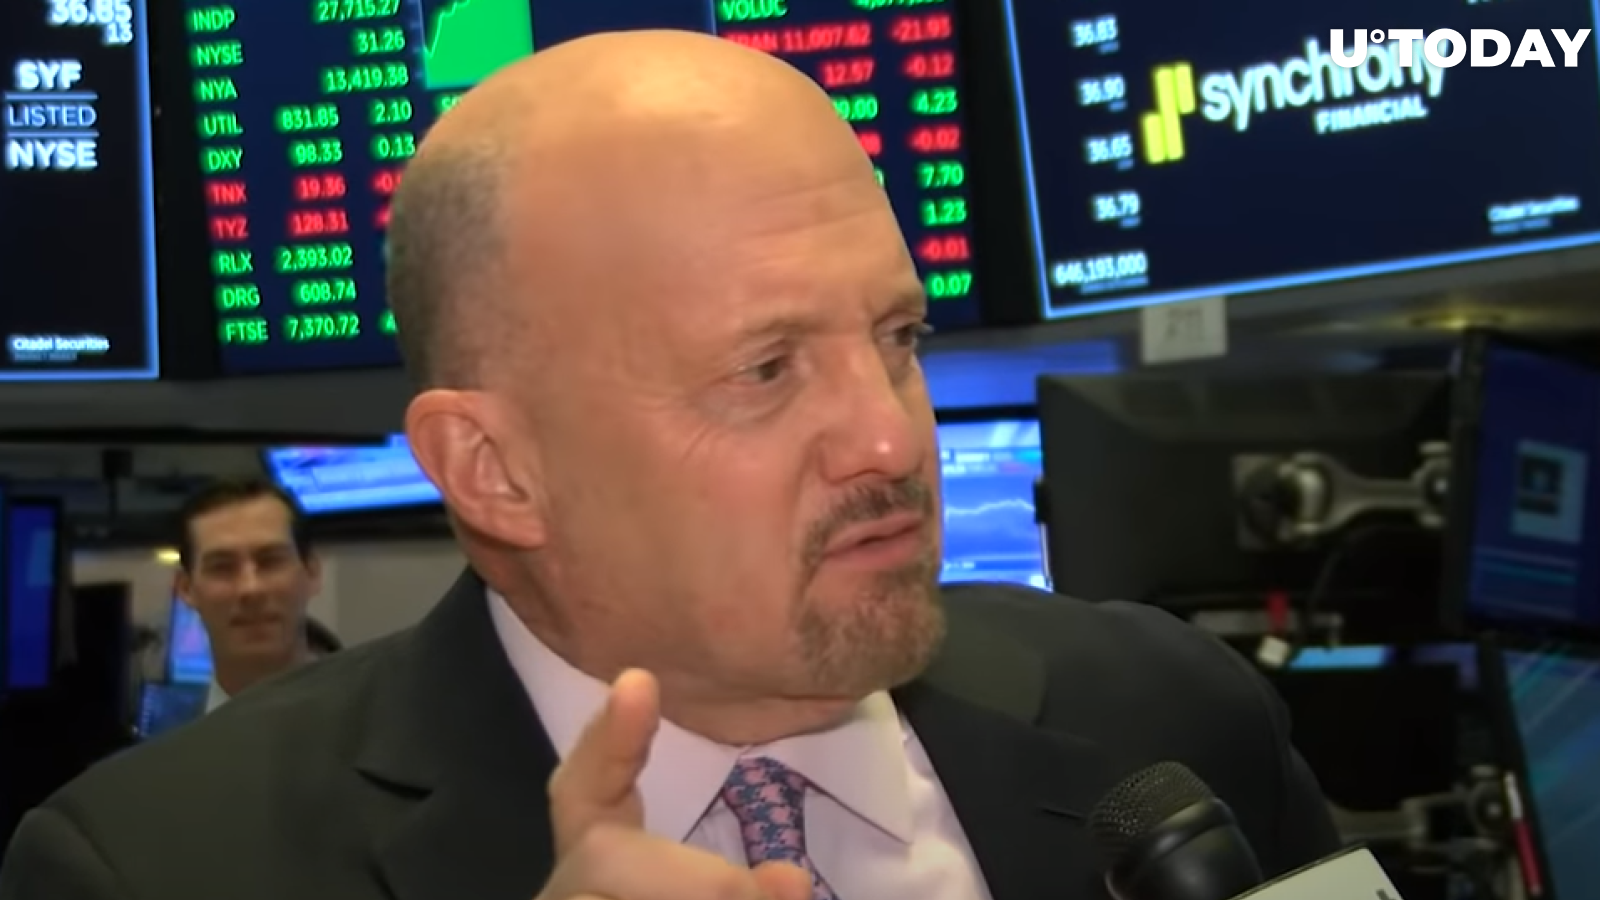 CNBC's Jim Cramer Now Owns Bitcoin. Has He Changed His Mind About Crypto? 